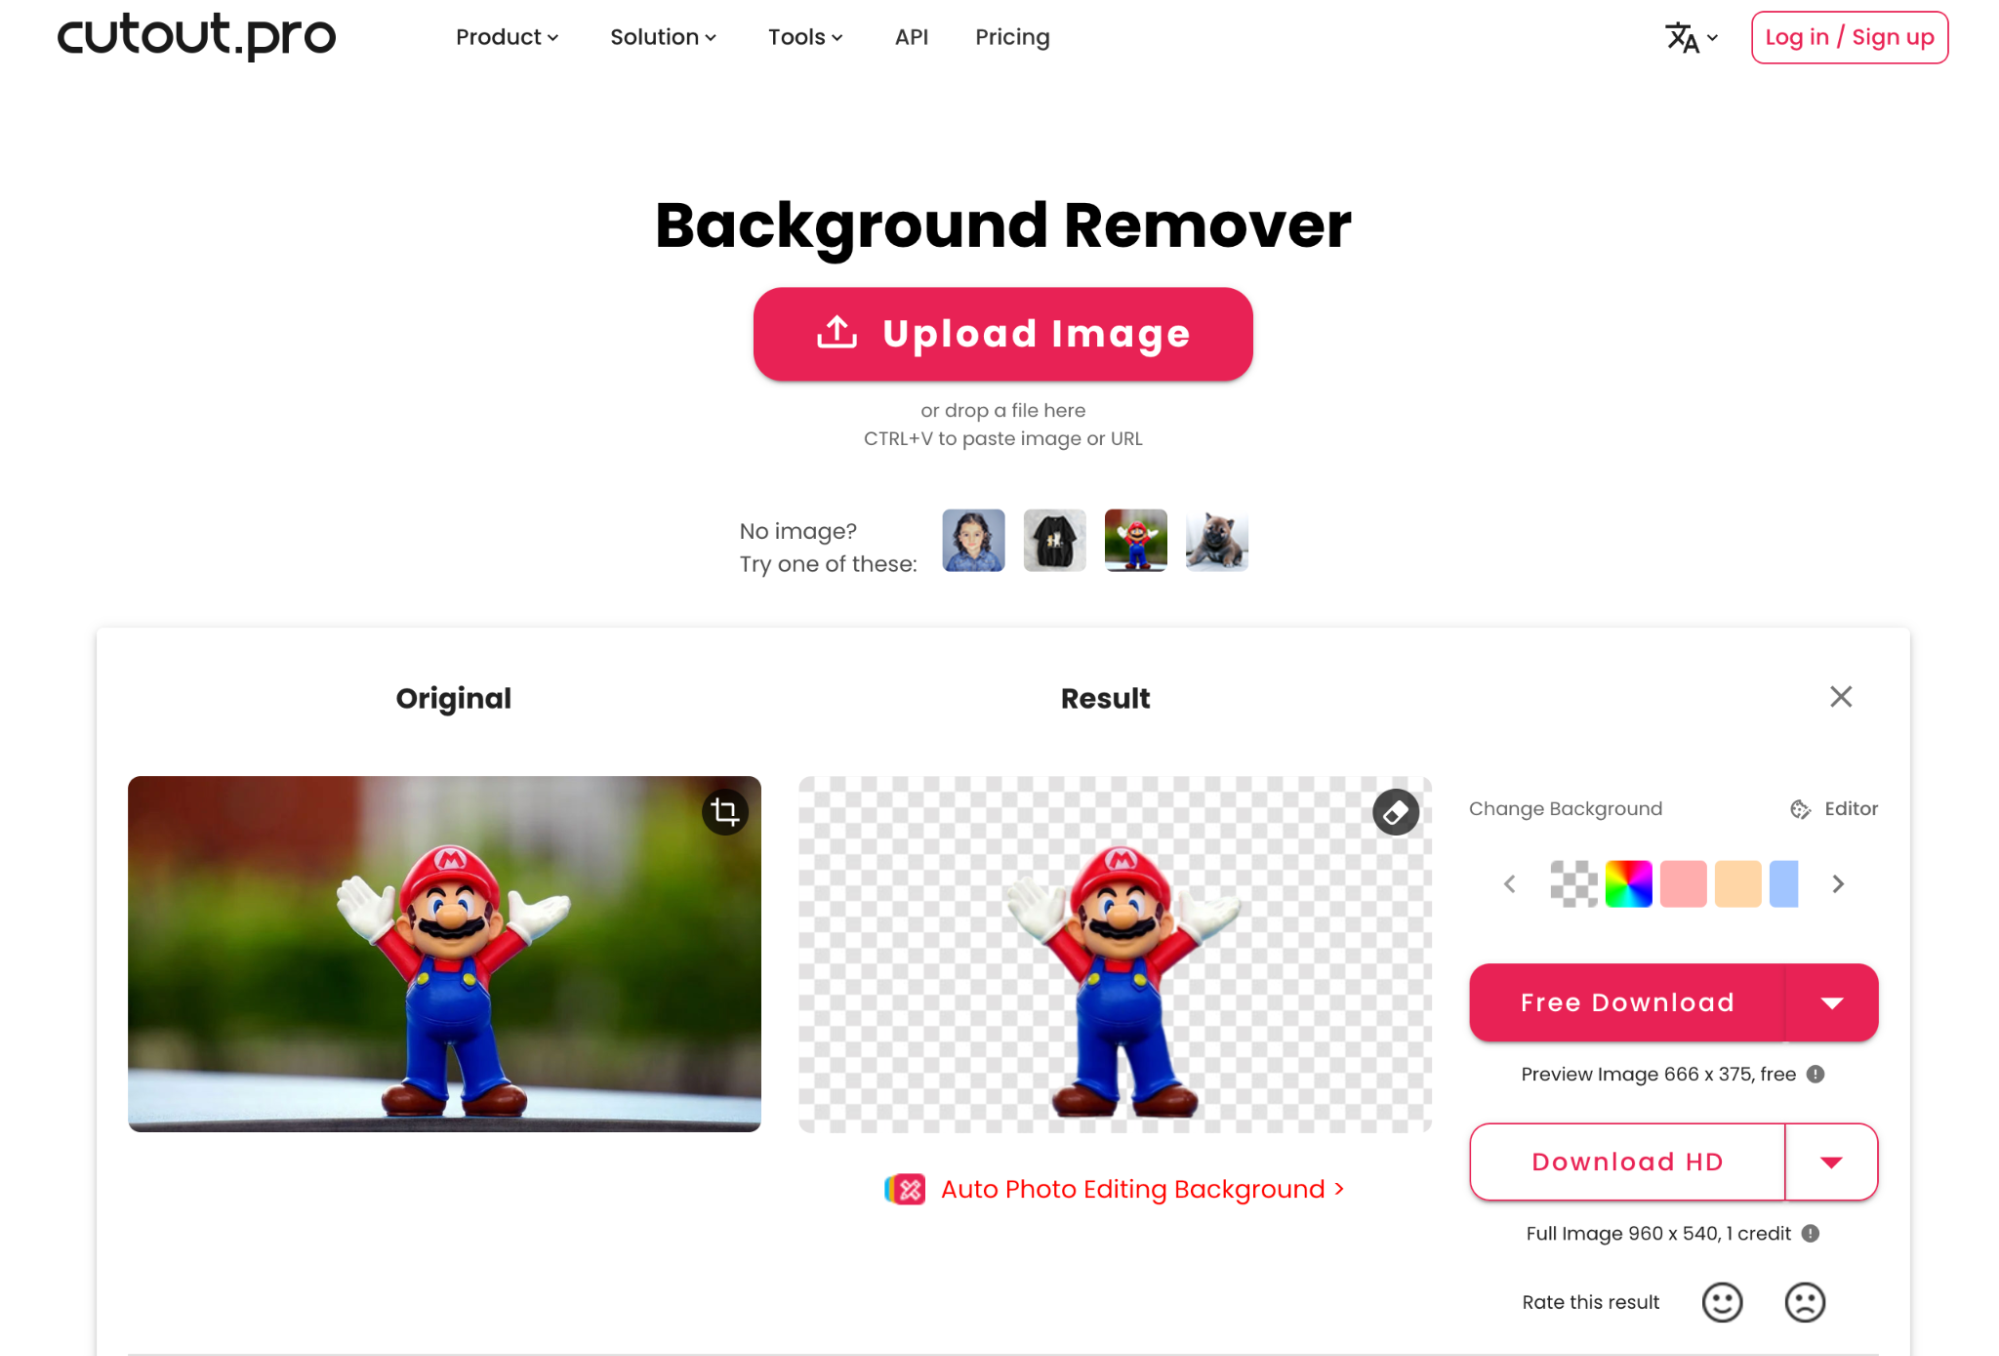 Cutout.pro background remover dashboard showing image of Mario toy being edited.